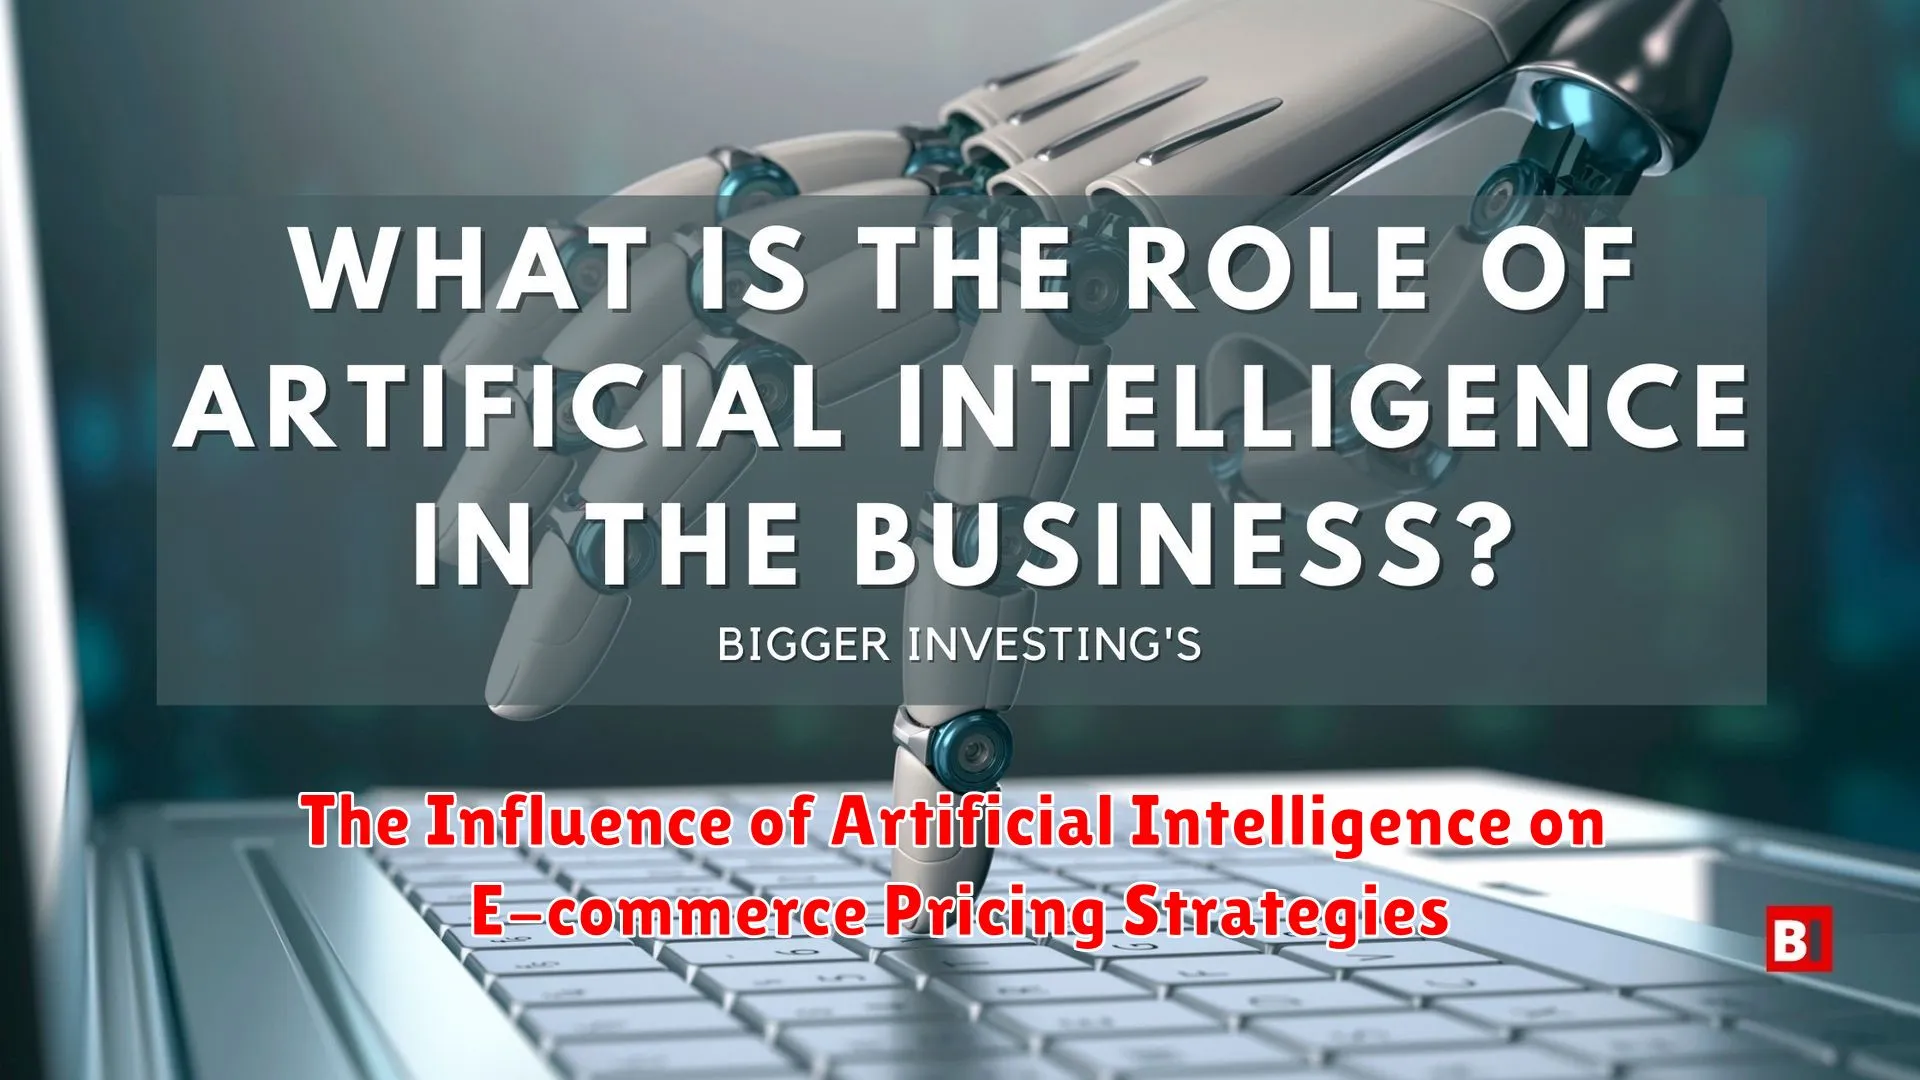 The Influence of Artificial Intelligence on E-commerce Pricing Strategies